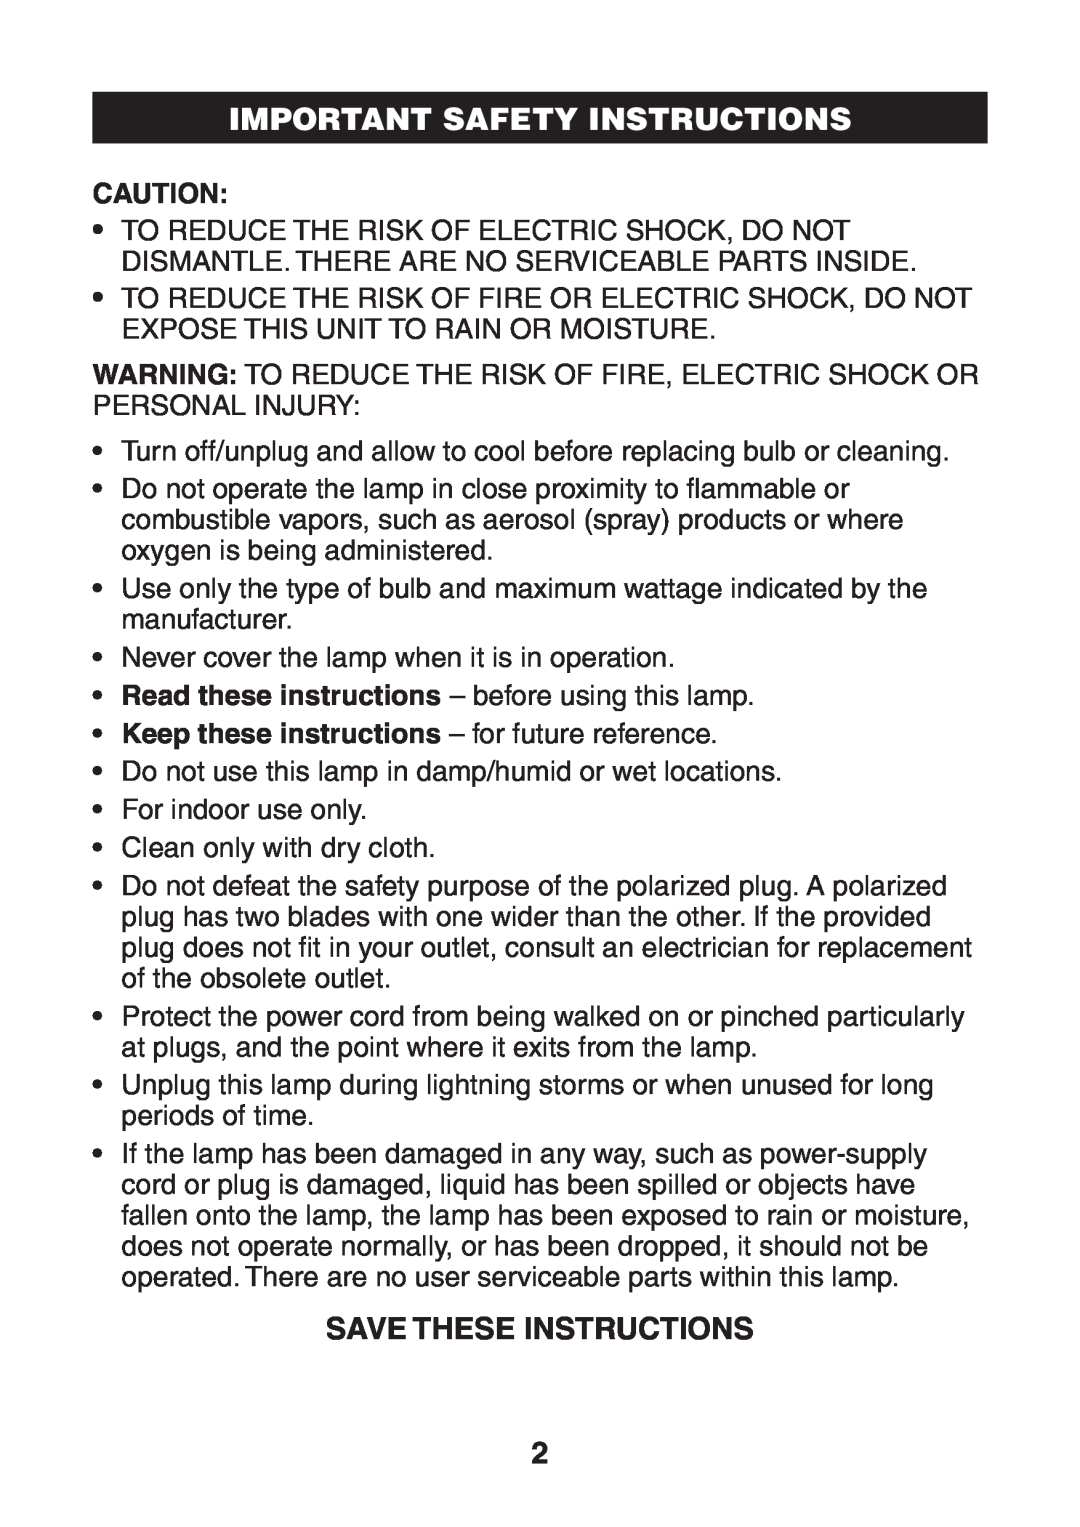 Verilux VD08 manual Important Safety Instructions, Save These Instructions, Keep these instructions - for future reference 